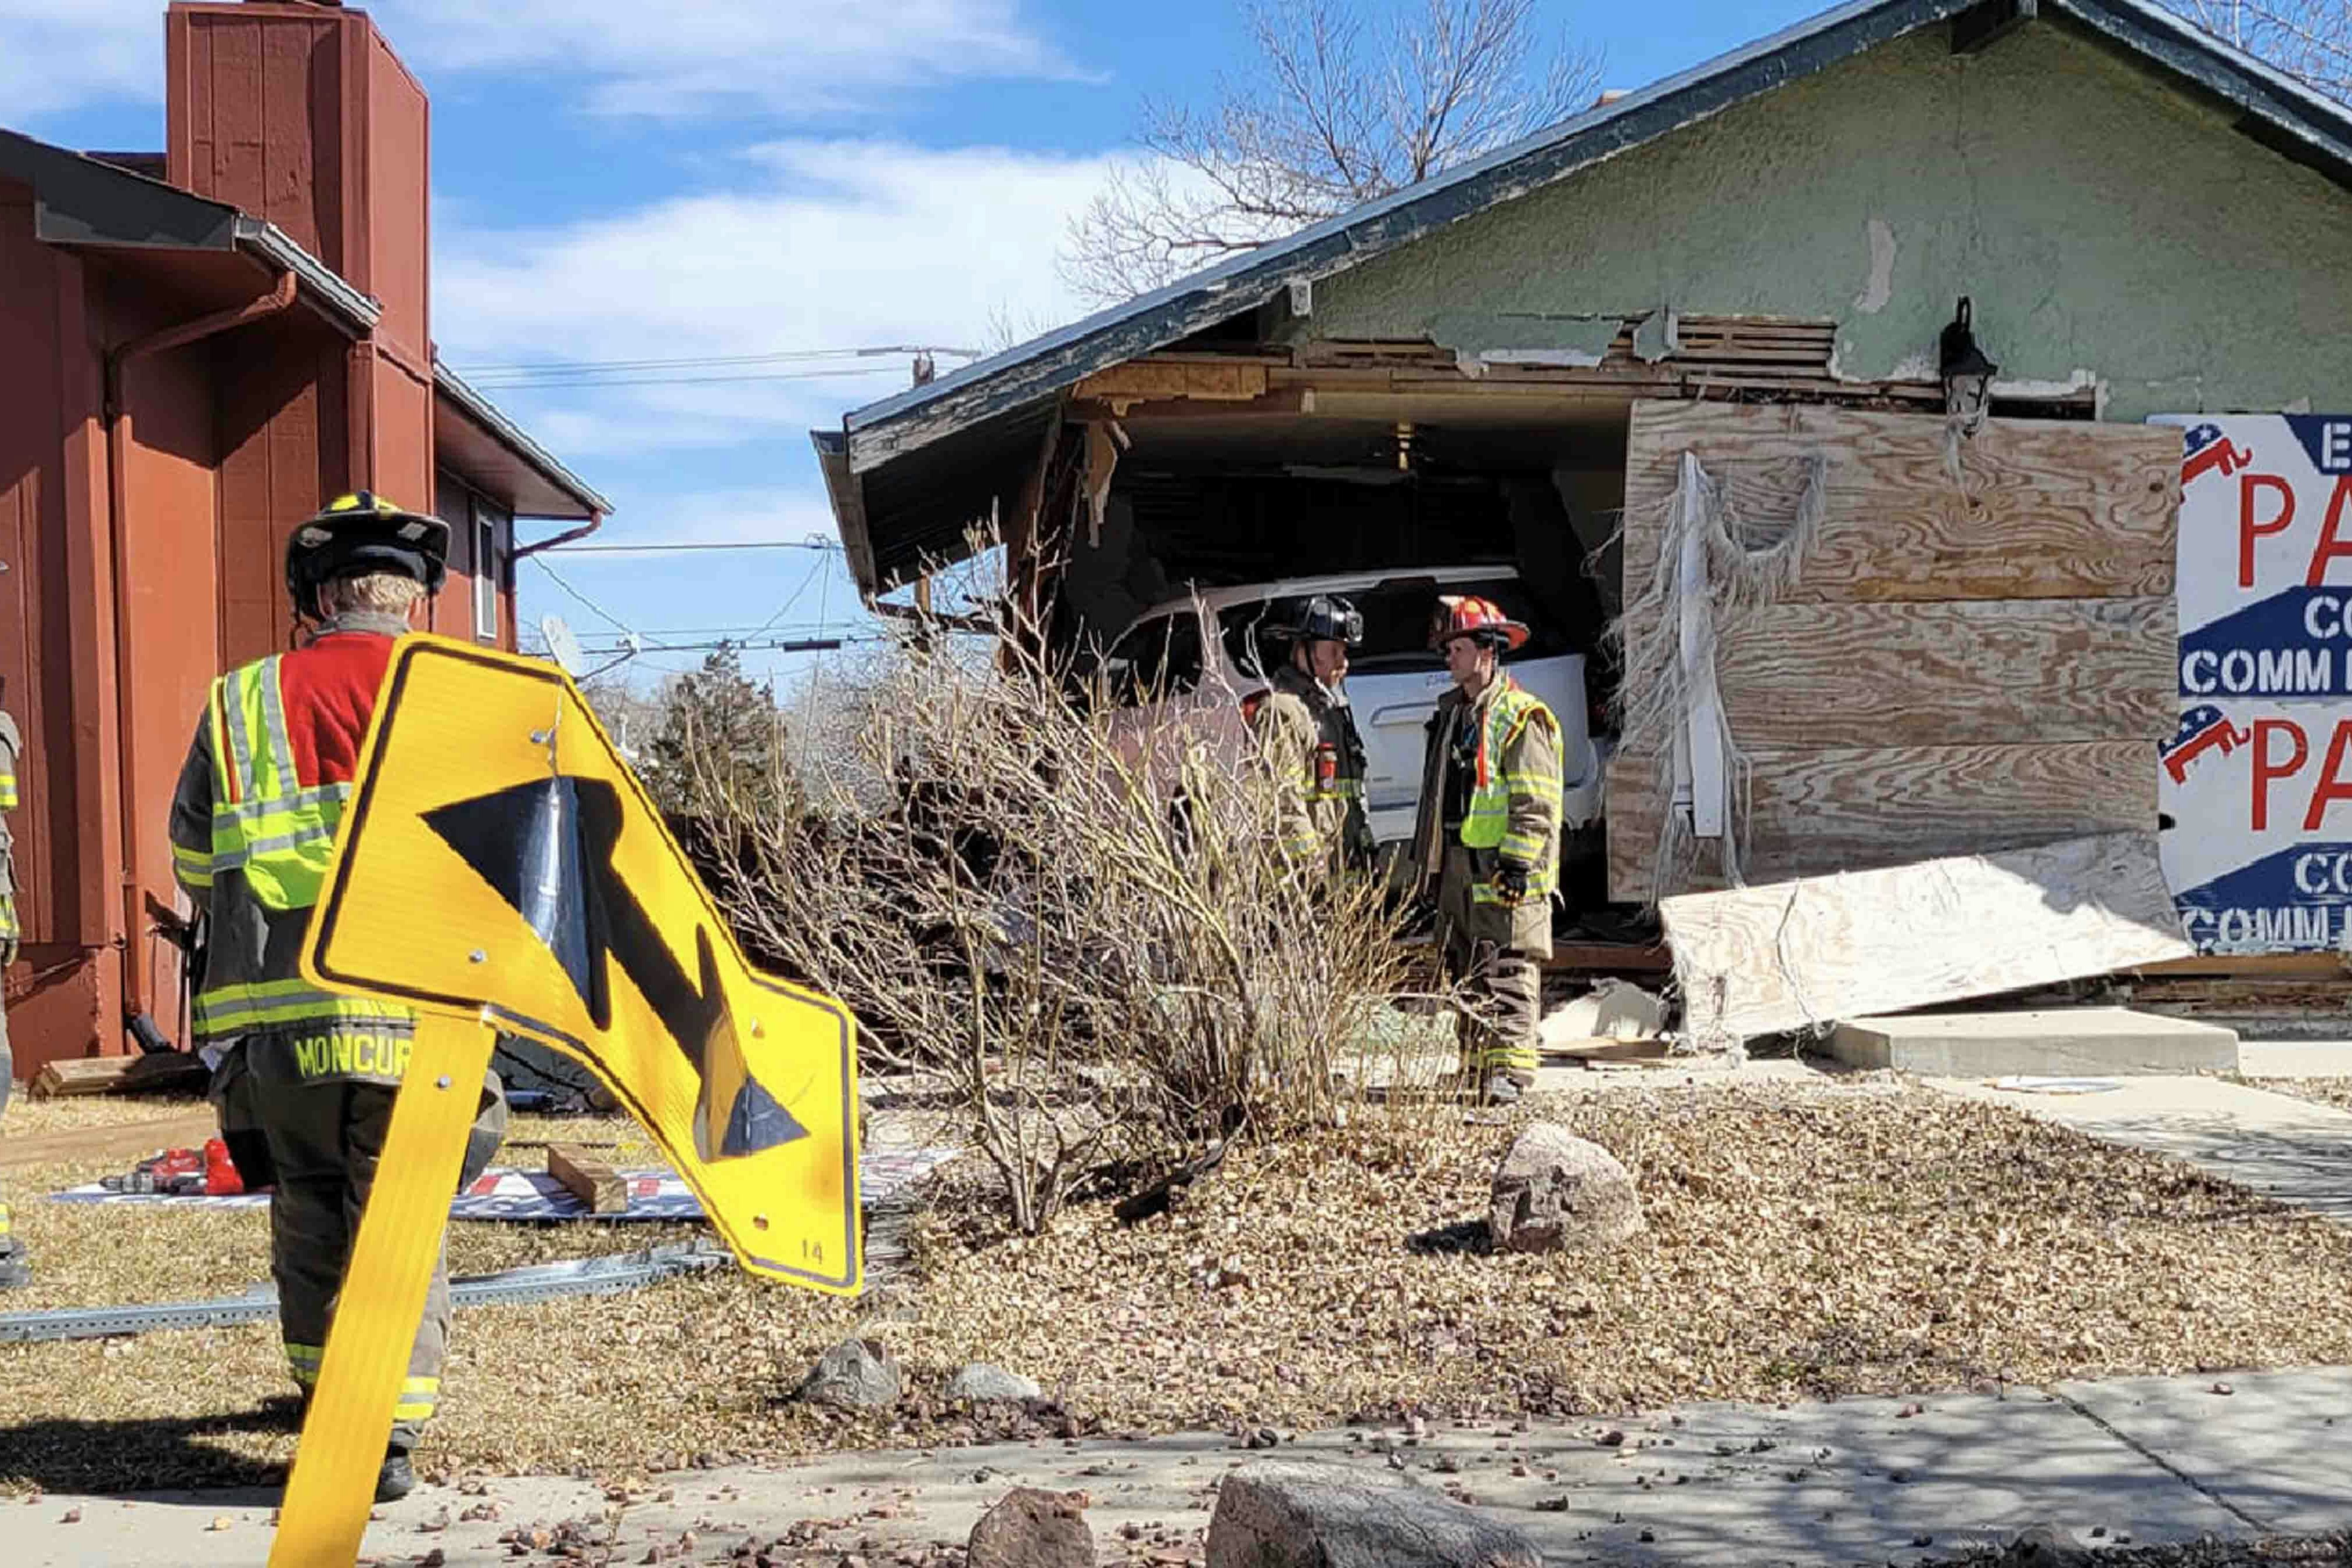 Casper fire and police personnel were called to the intersection of 13th and McKinley streets on Sunday to find a driver suffering a medical emergency who had plowed into a house.